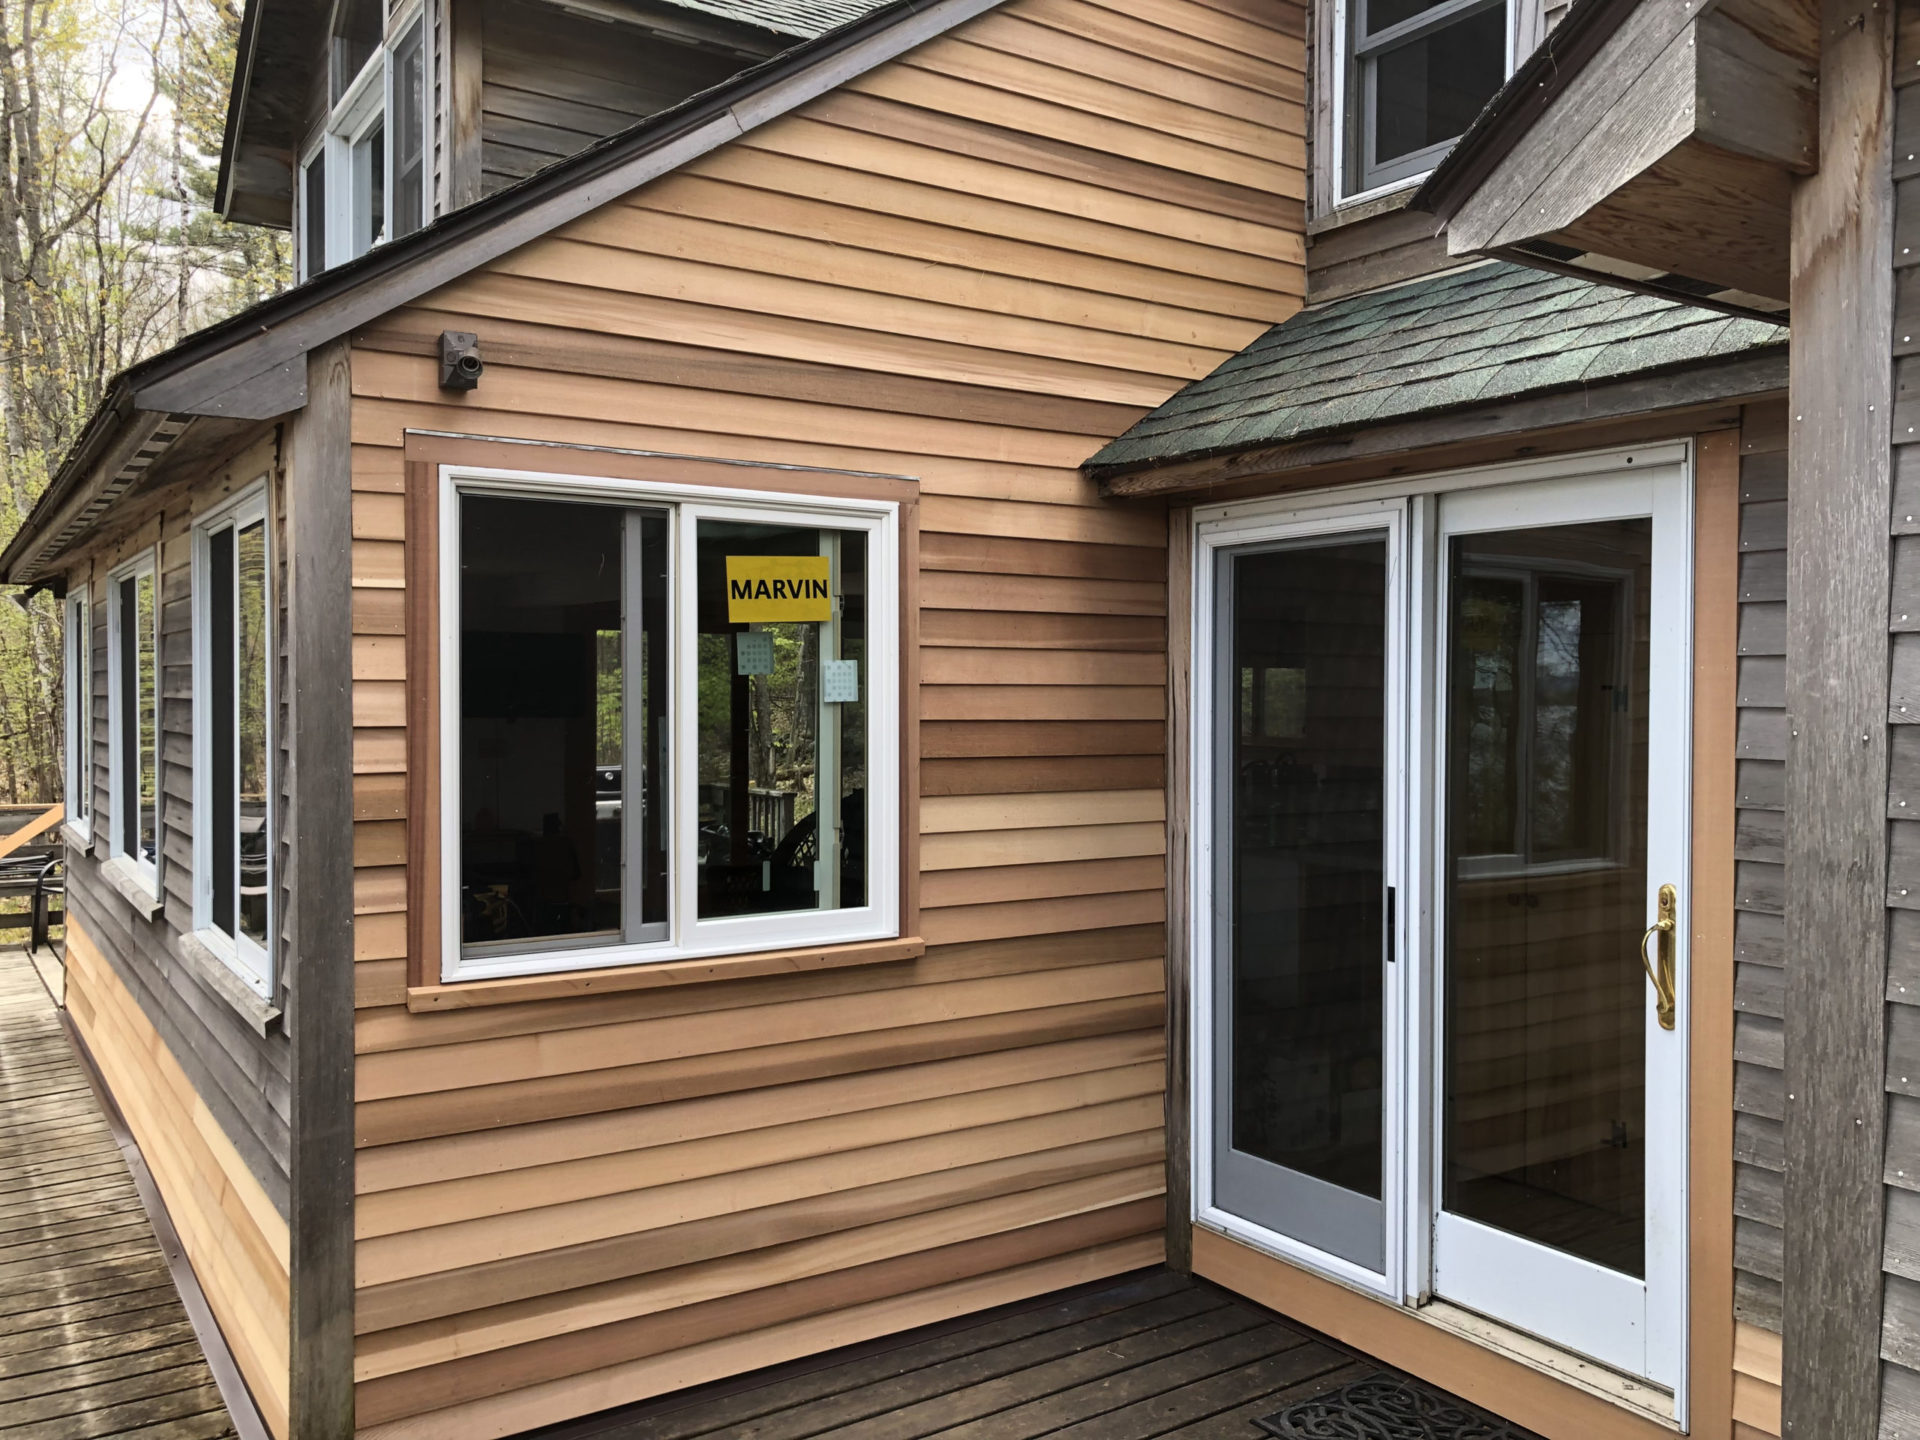 New Cedar Siding and New Windows by XL Home Improvements.